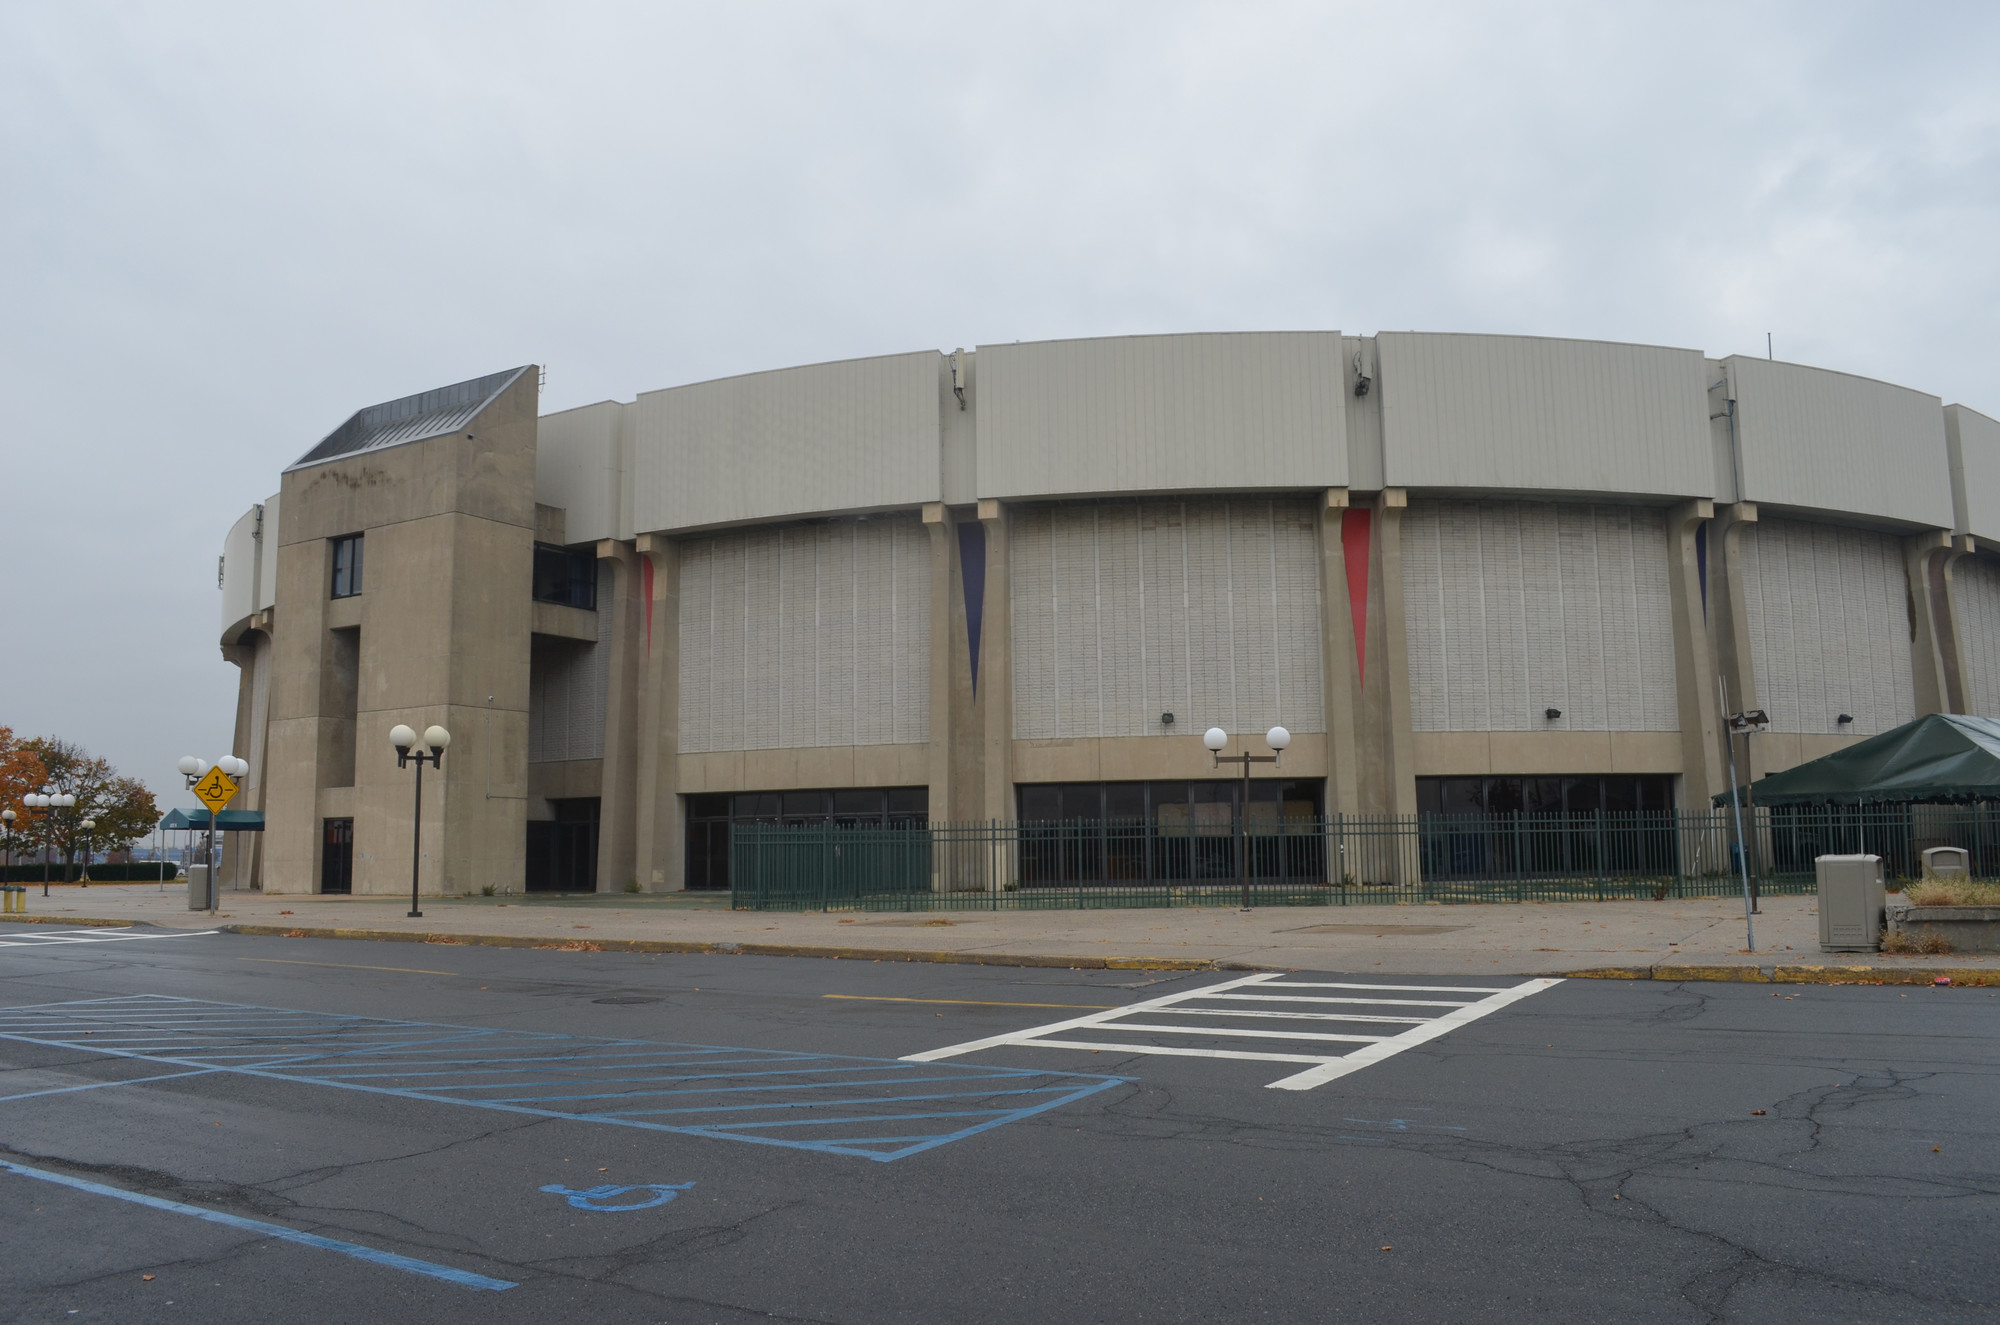 Construction began at Nassau Veterans Memorial Coliseum, in nearby Uniondale, in November. The initial work is being done inside the arena.